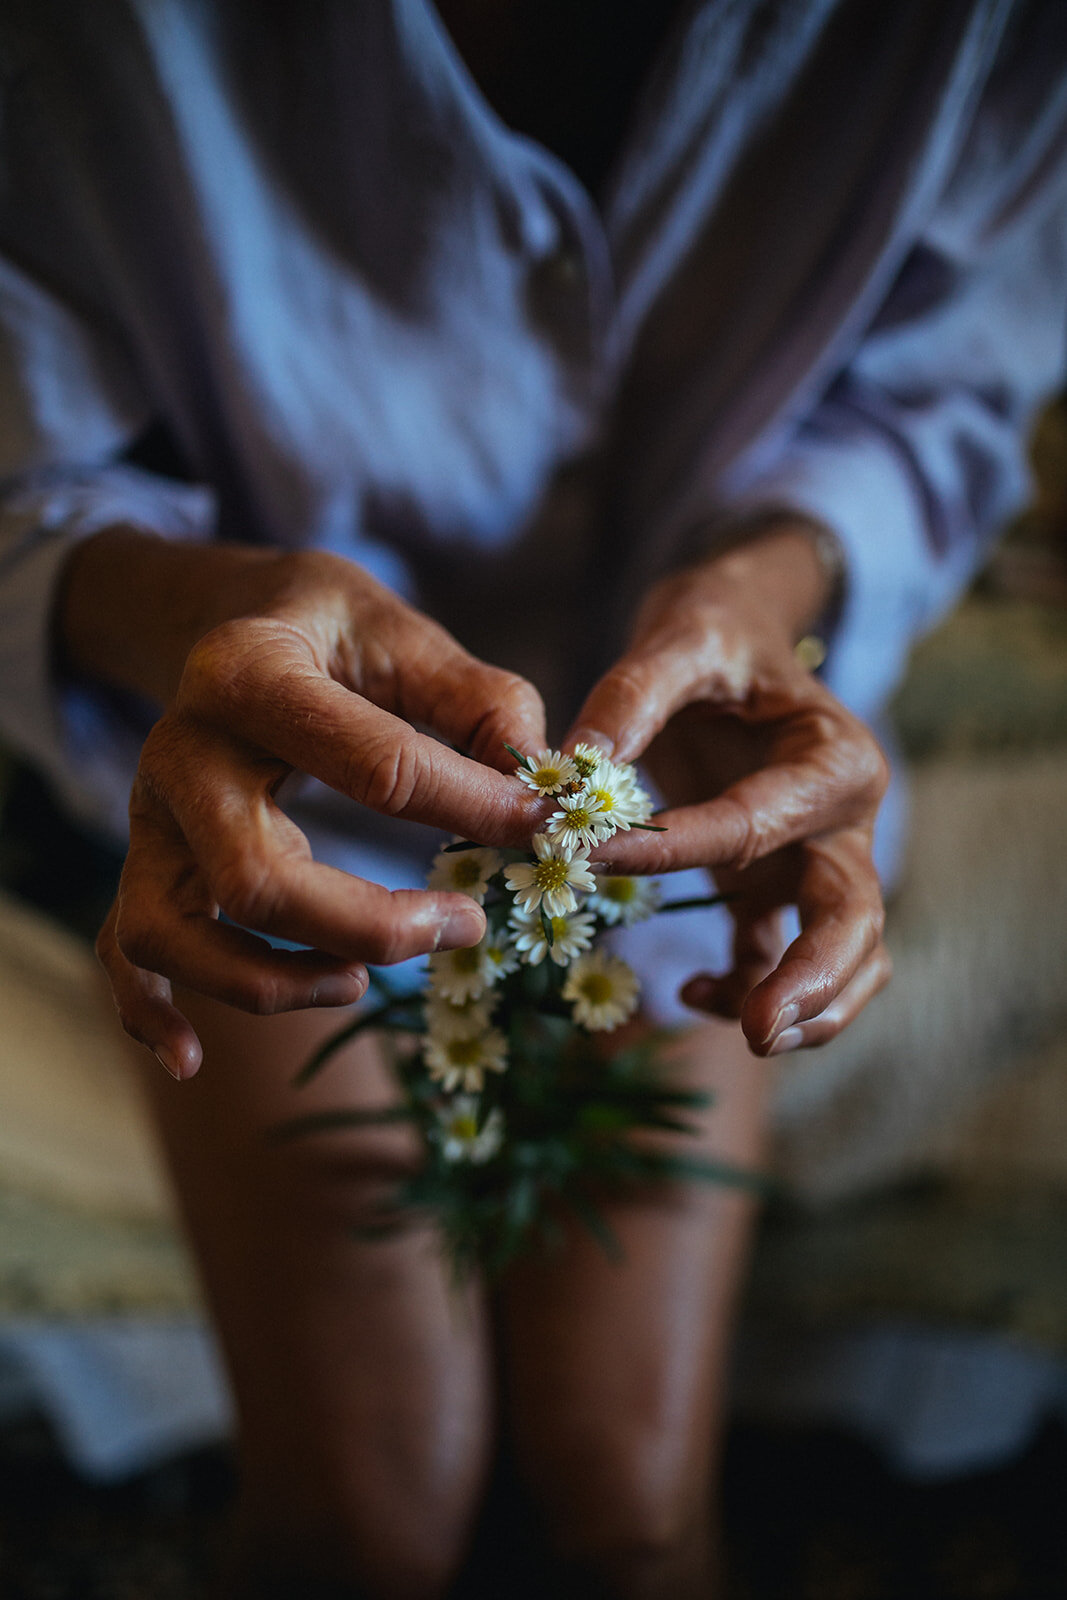 Hands with flowers in Cape Cod Shawnee Custalow wedding photography